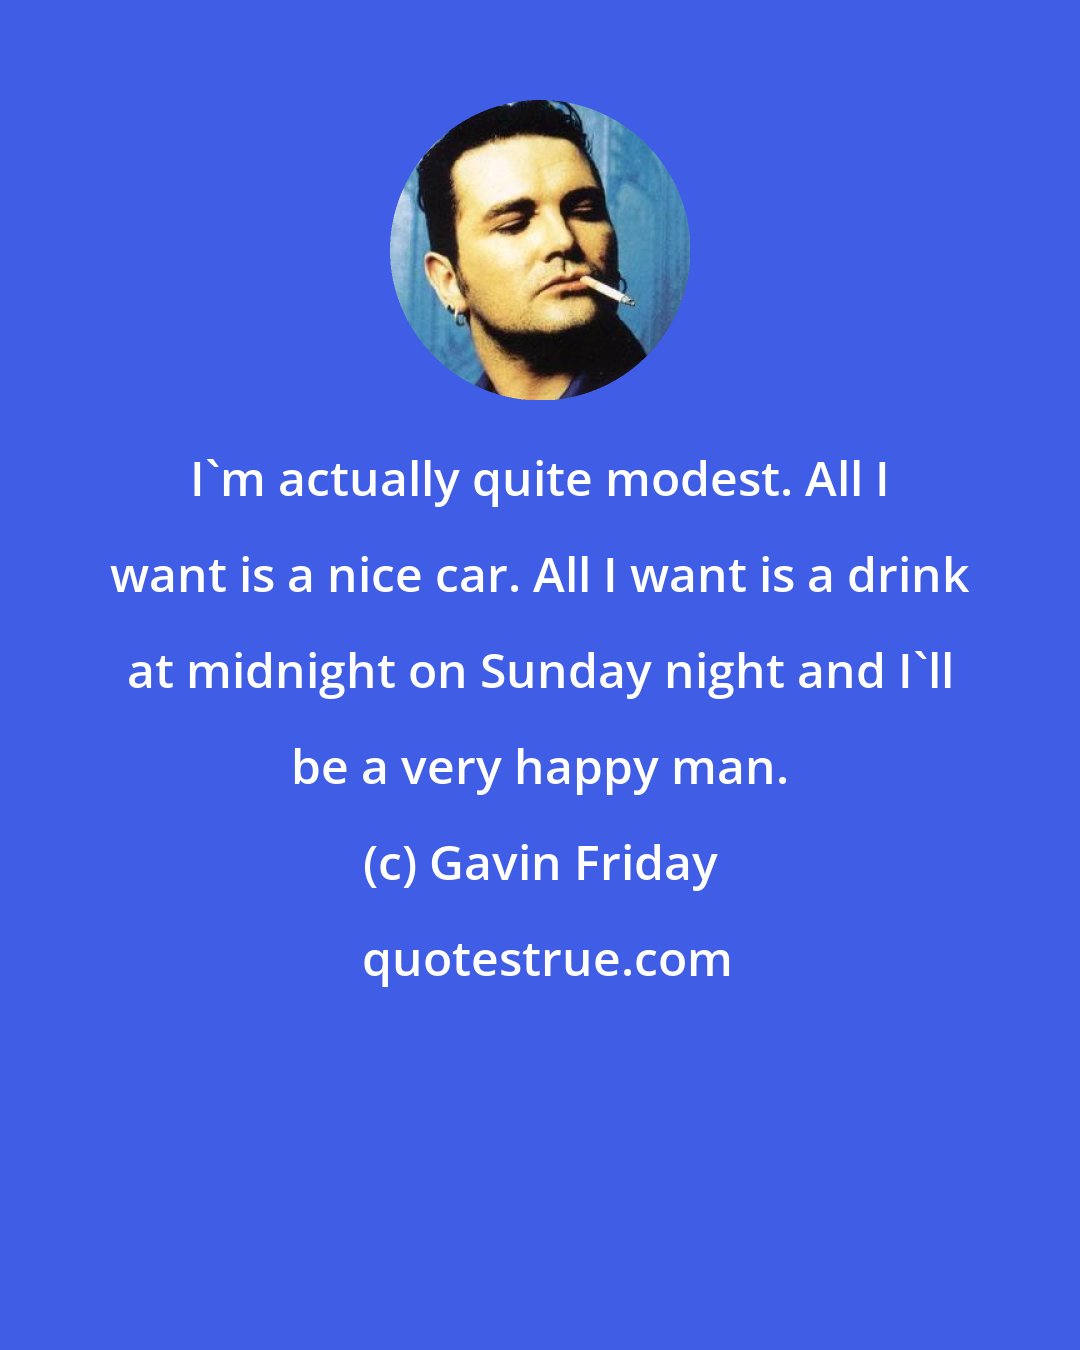 Gavin Friday: I'm actually quite modest. All I want is a nice car. All I want is a drink at midnight on Sunday night and I'll be a very happy man.